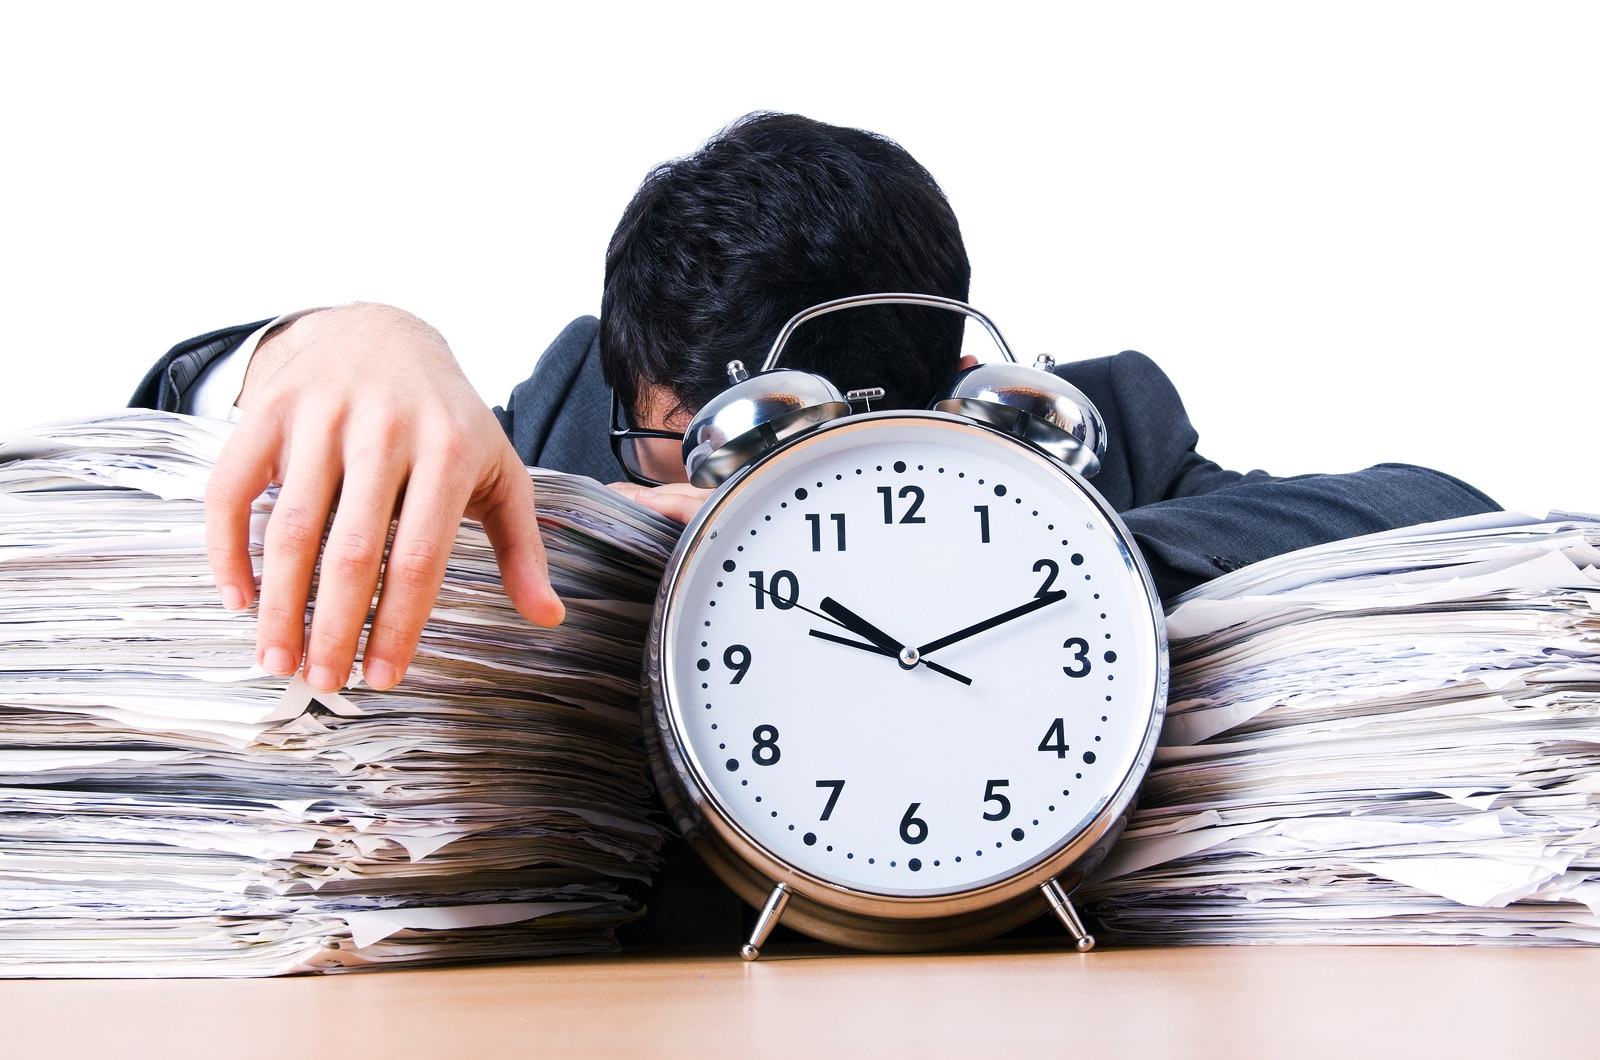 What to Do Today To Improve Your Time Management Skills